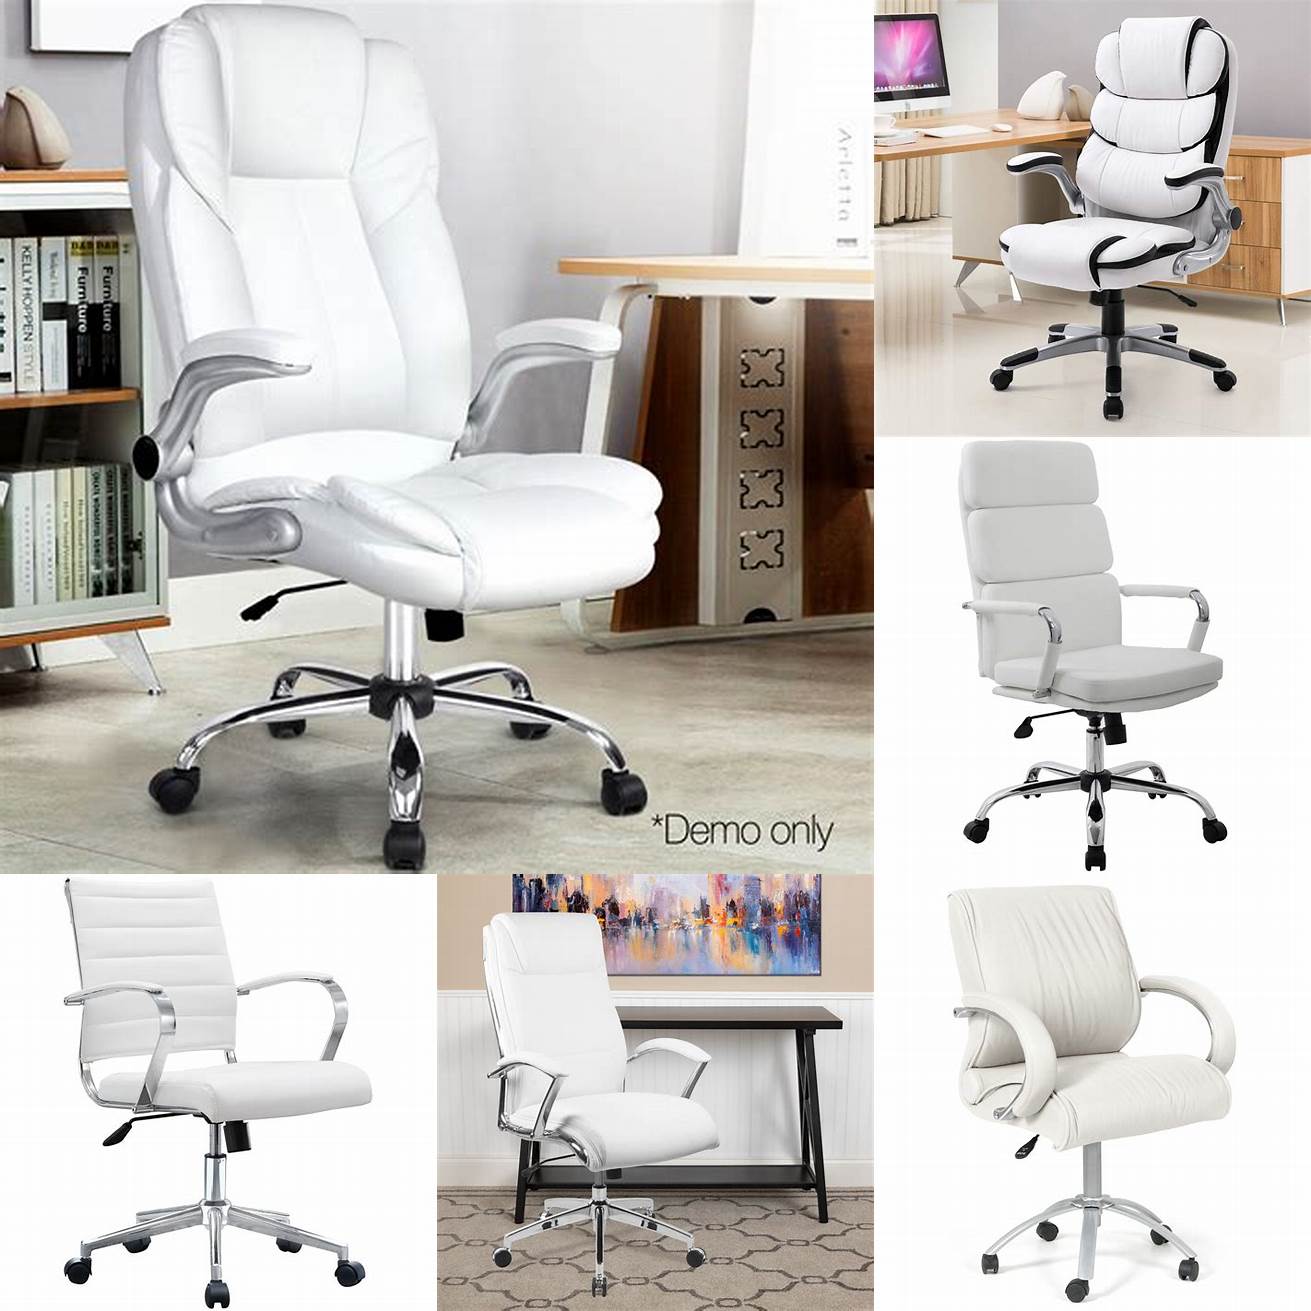 Front view of the White Leather Office Chair